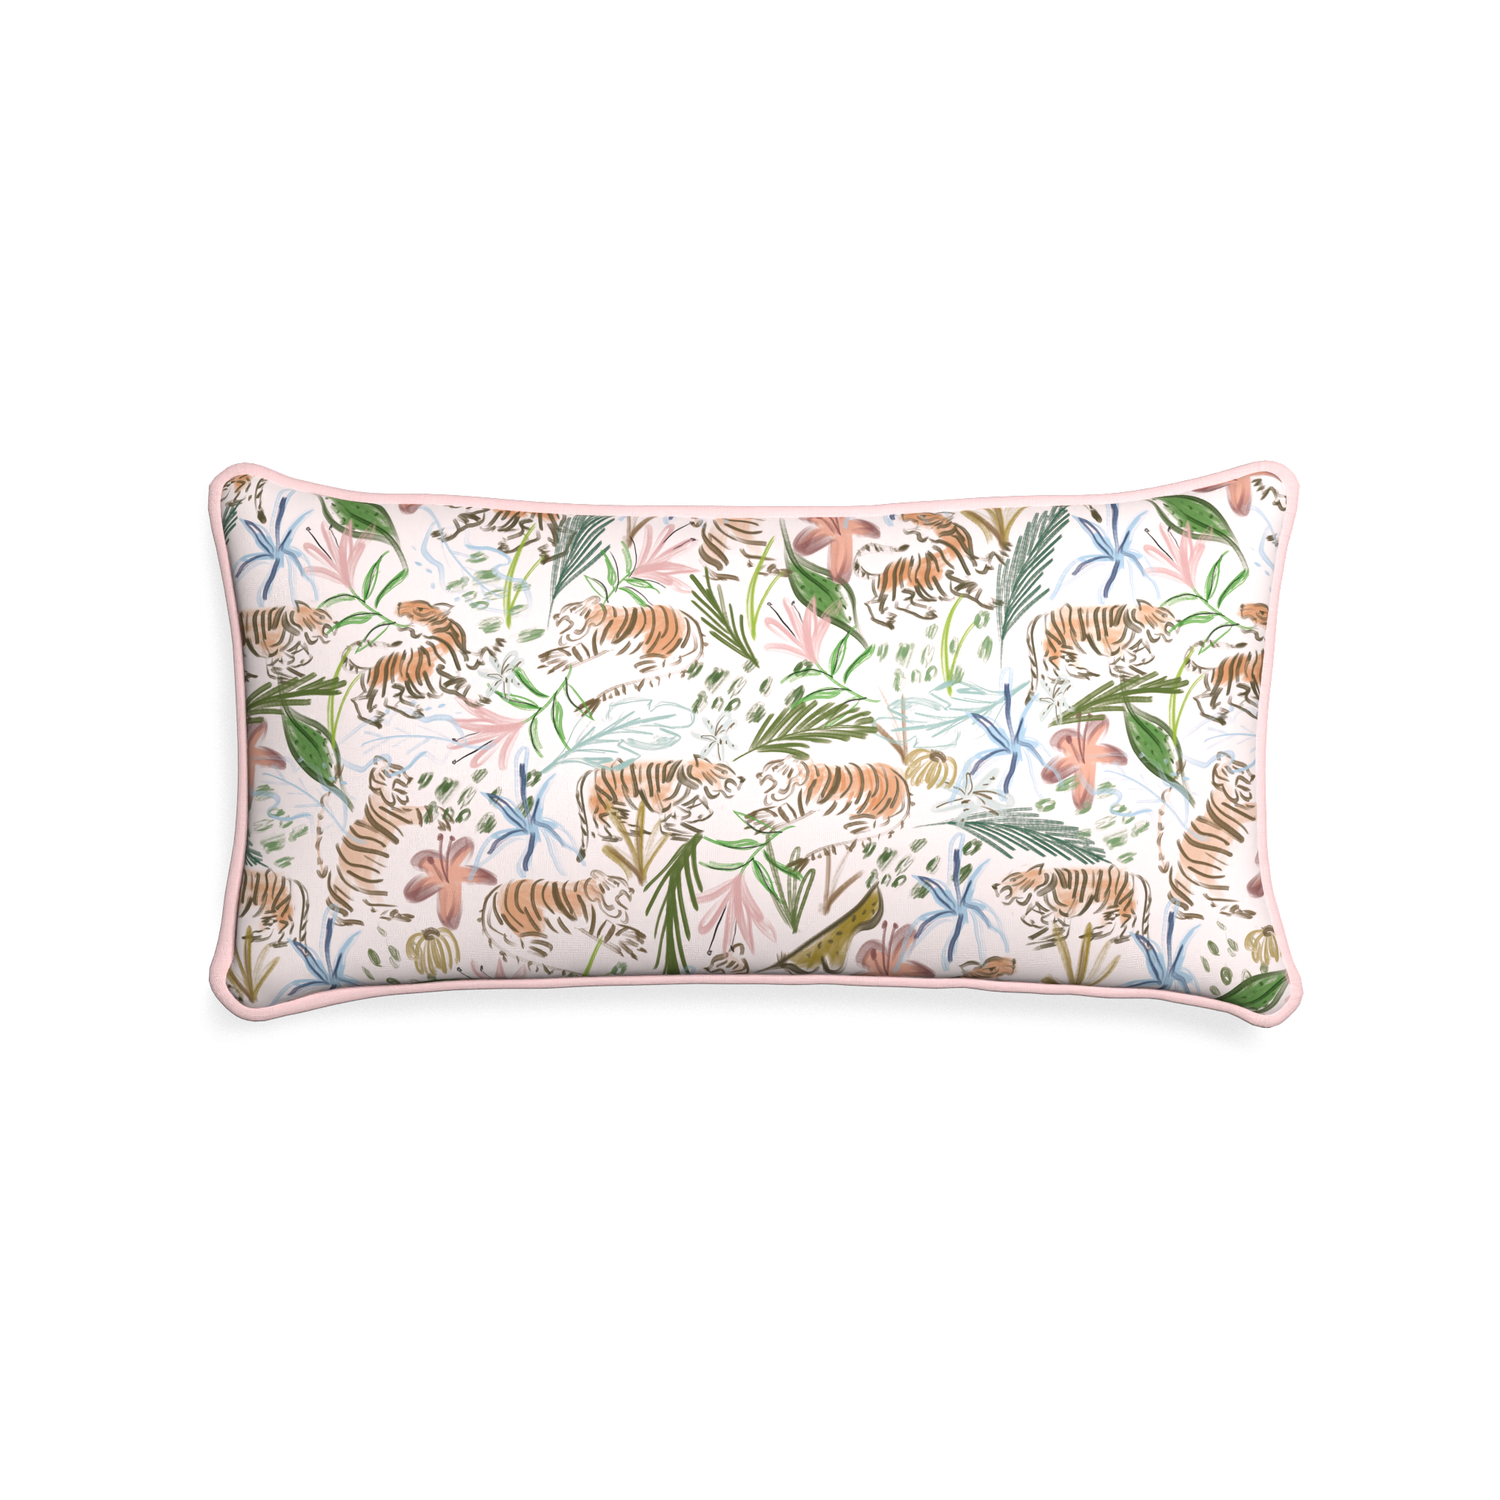 Midi-lumbar frida pink custom pink chinoiserie tigerpillow with petal piping on white background